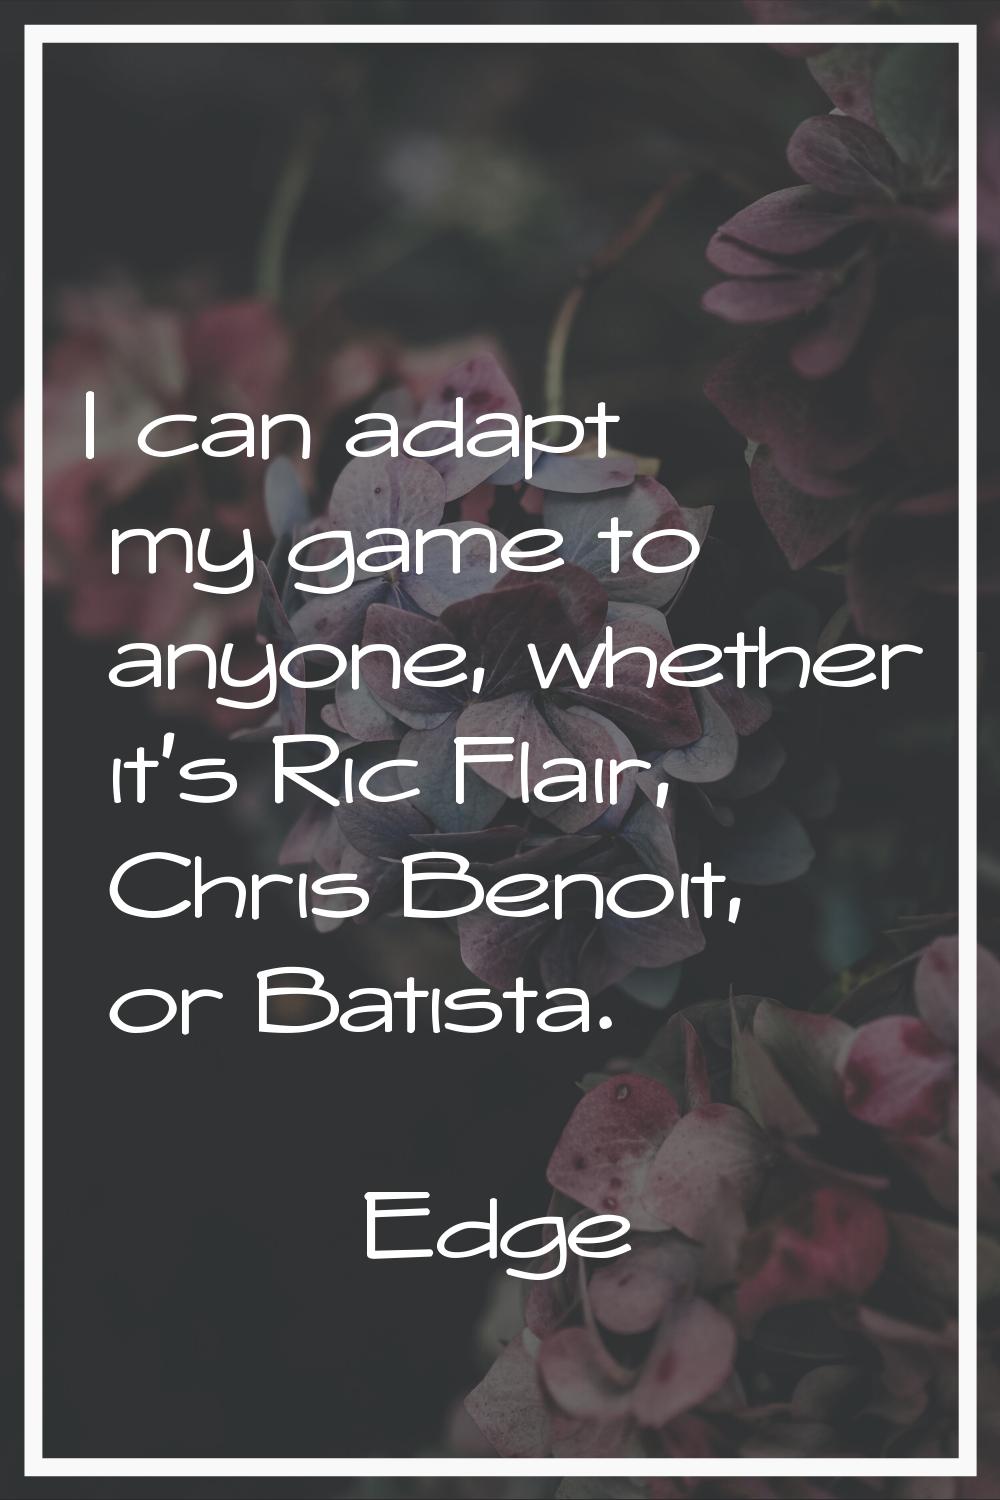 I can adapt my game to anyone, whether it's Ric Flair, Chris Benoit, or Batista.